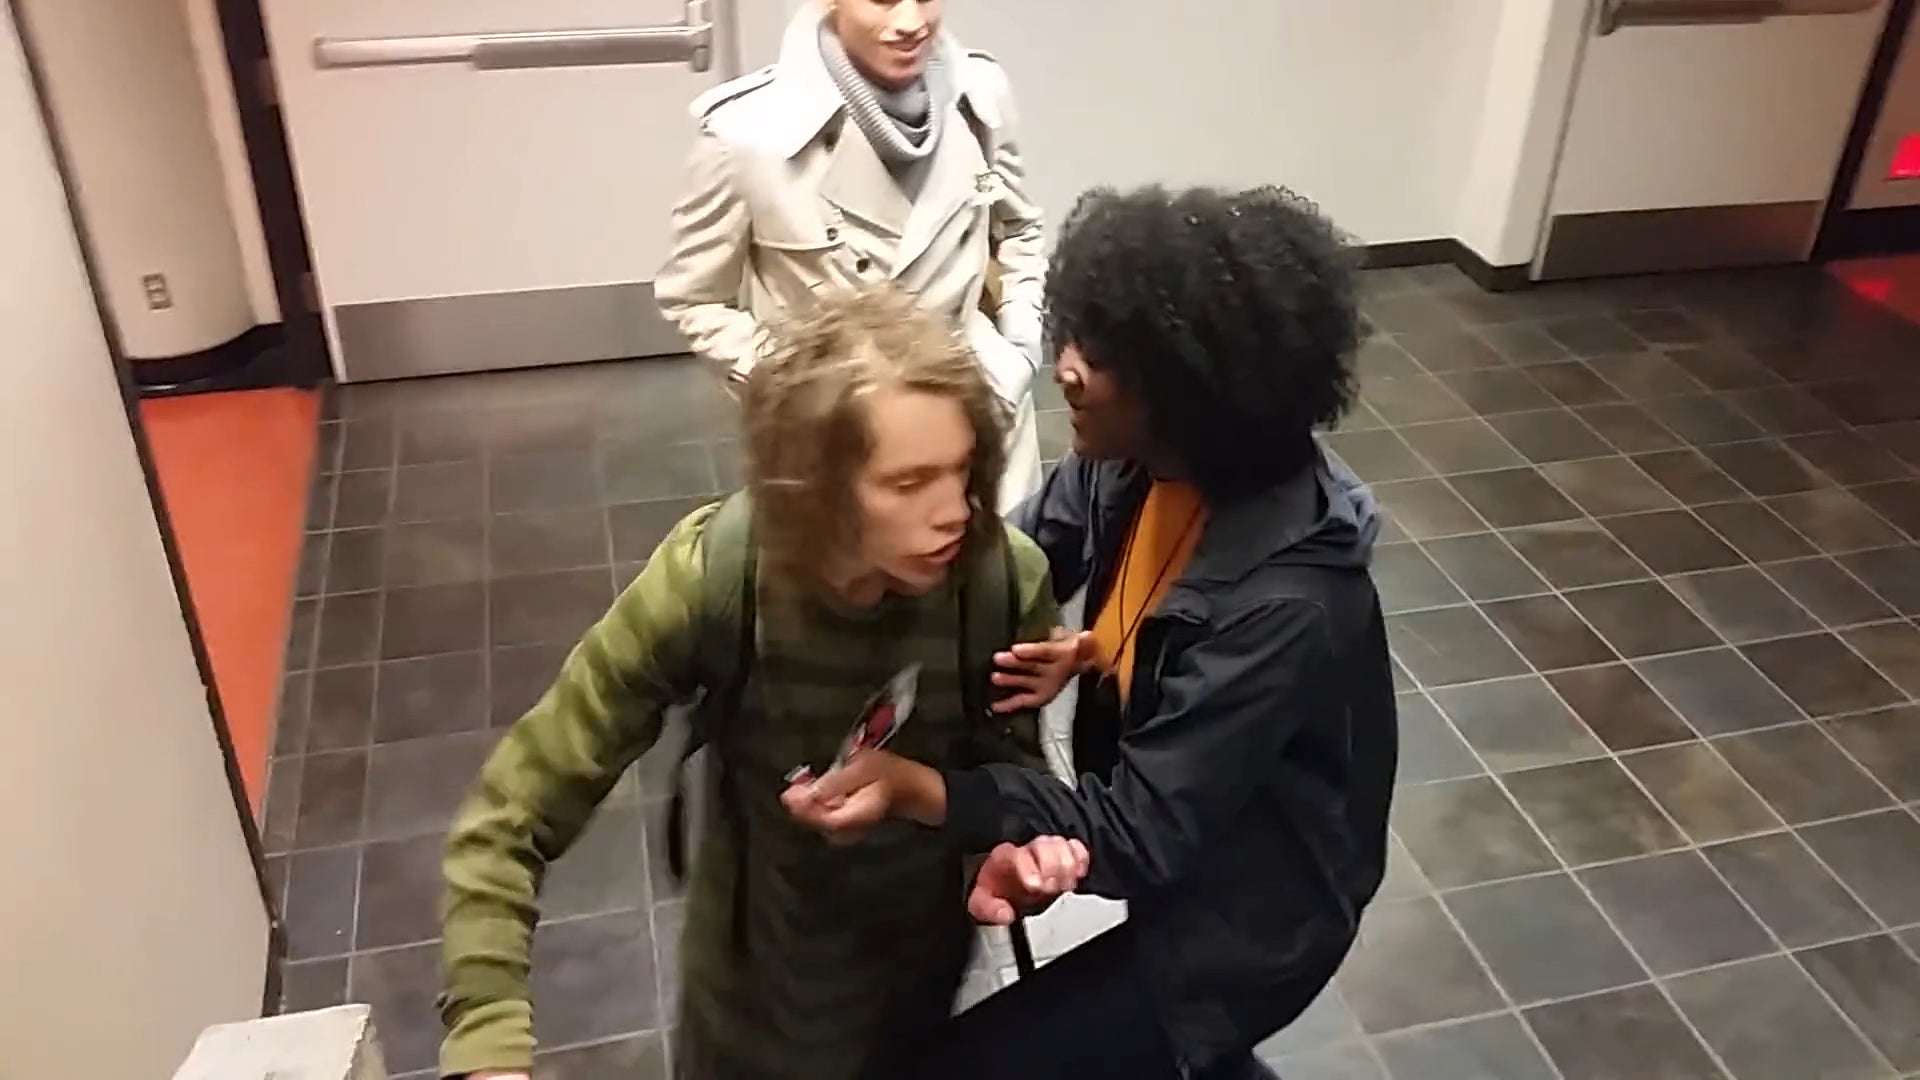 image for Campus employee assaults white student for "cultural appropriation" : ActualPublicFreakouts